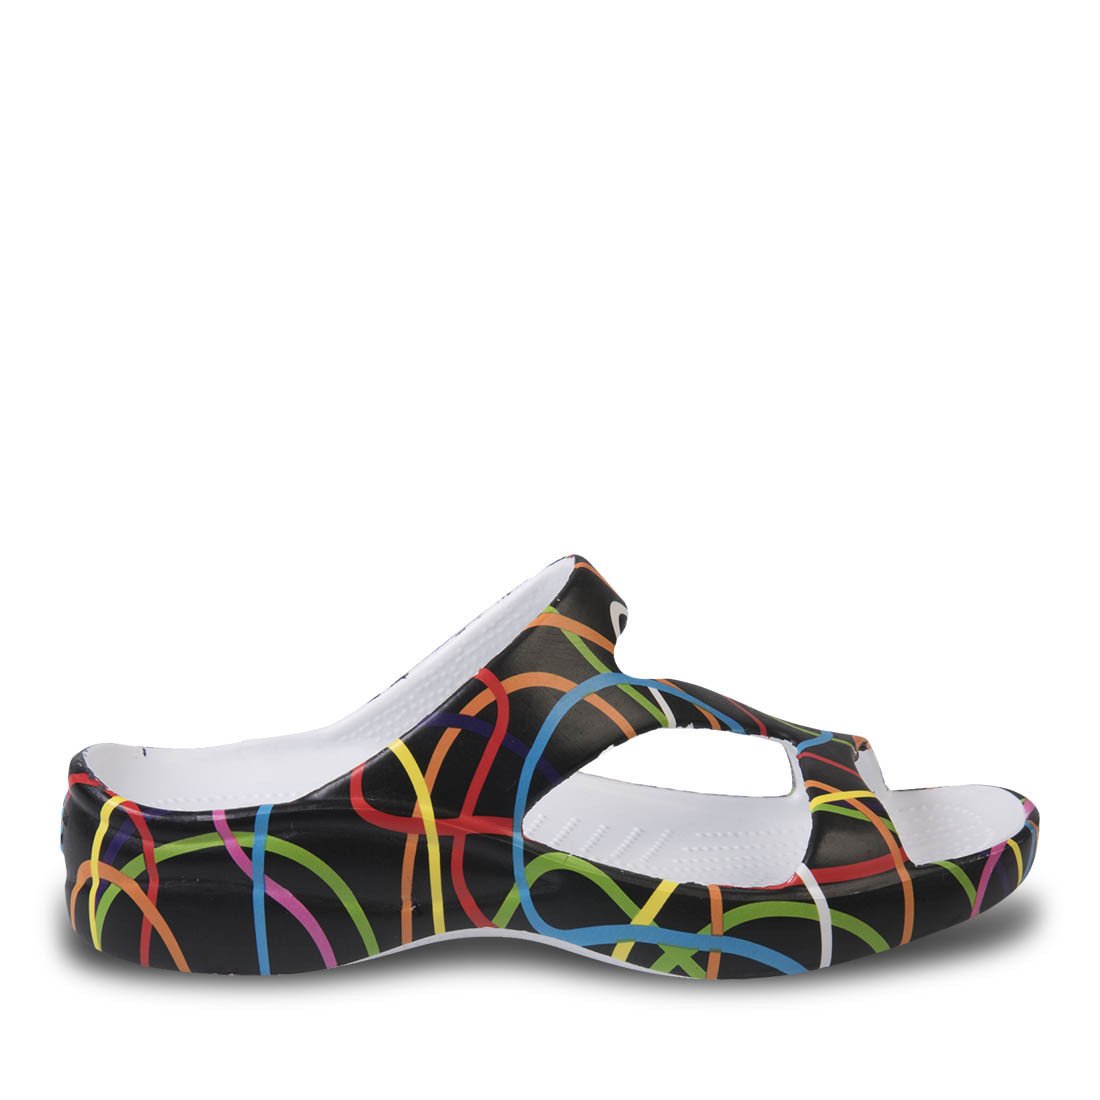 Image of Women's Loudmouth Z Sandals - Scribblz